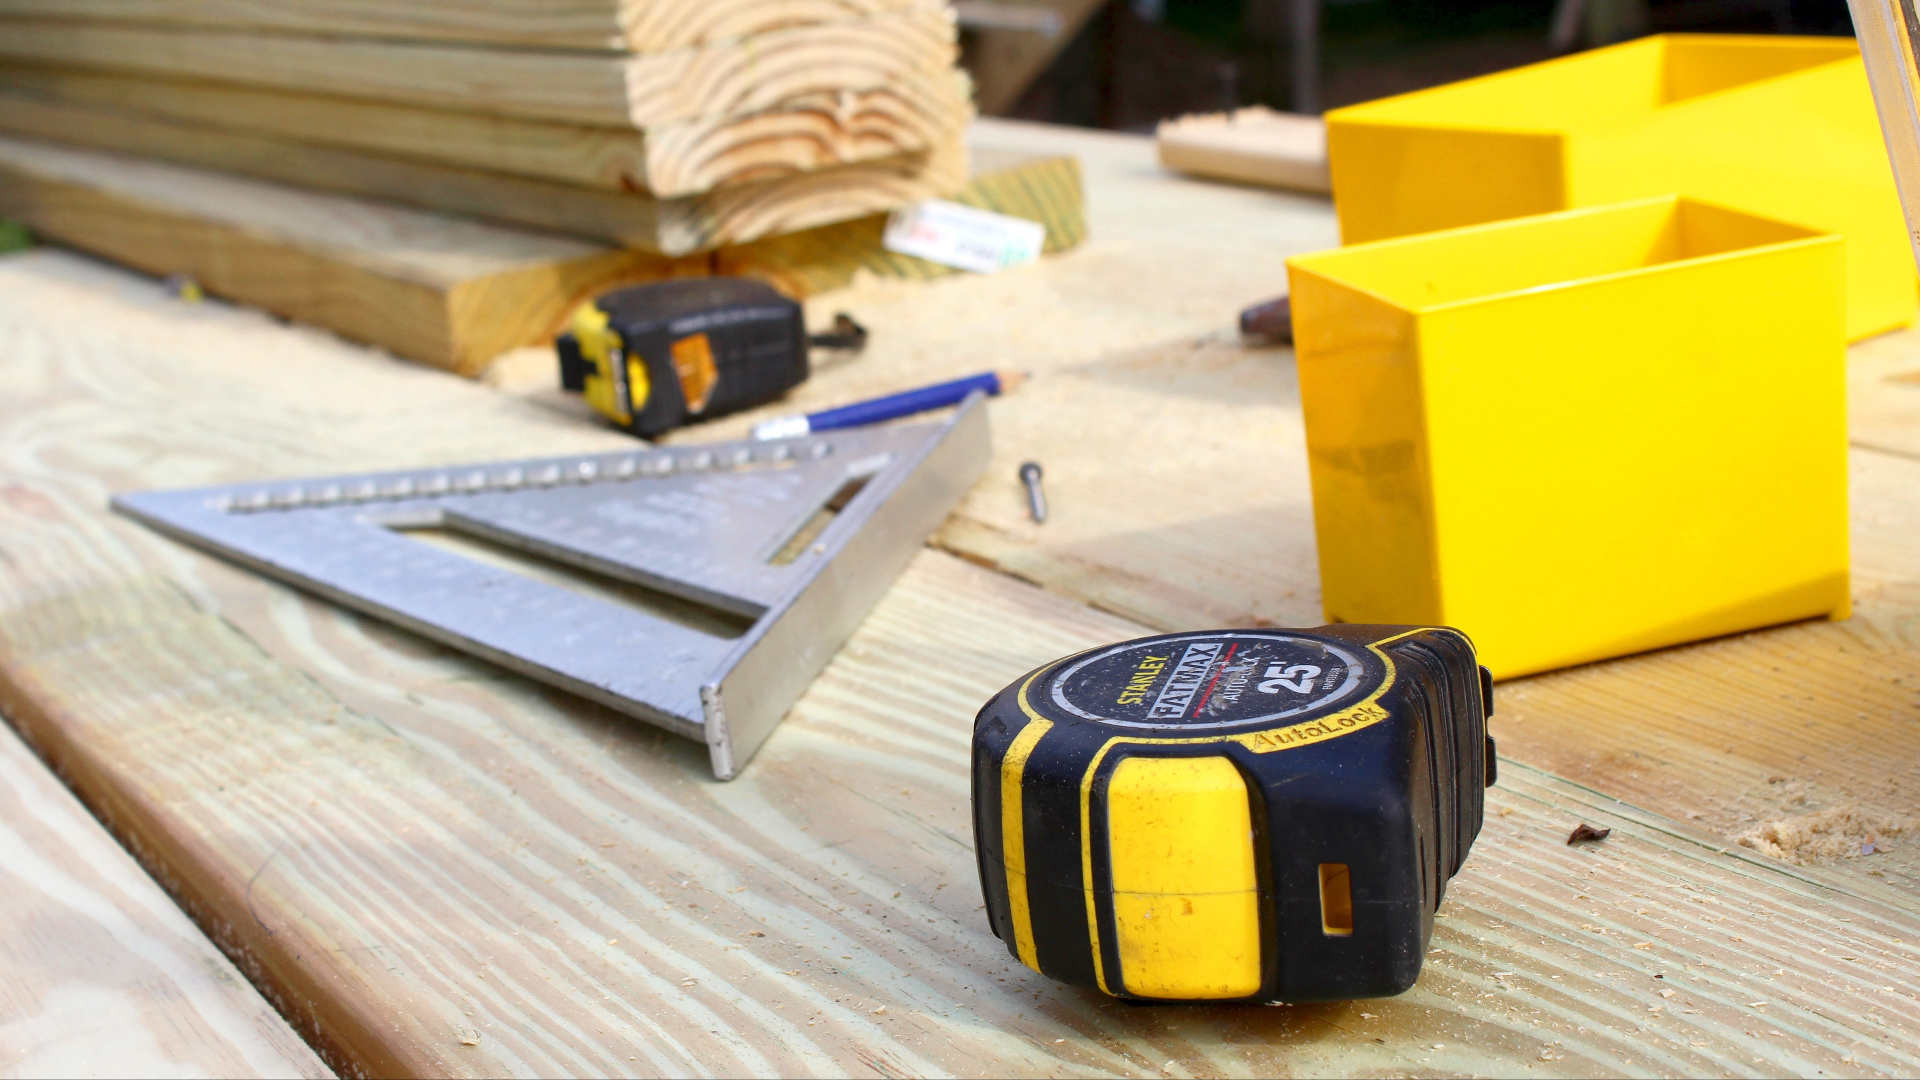 Your Self-Build Budget: Where in the UK Has the Most Affordable Tradesmen?